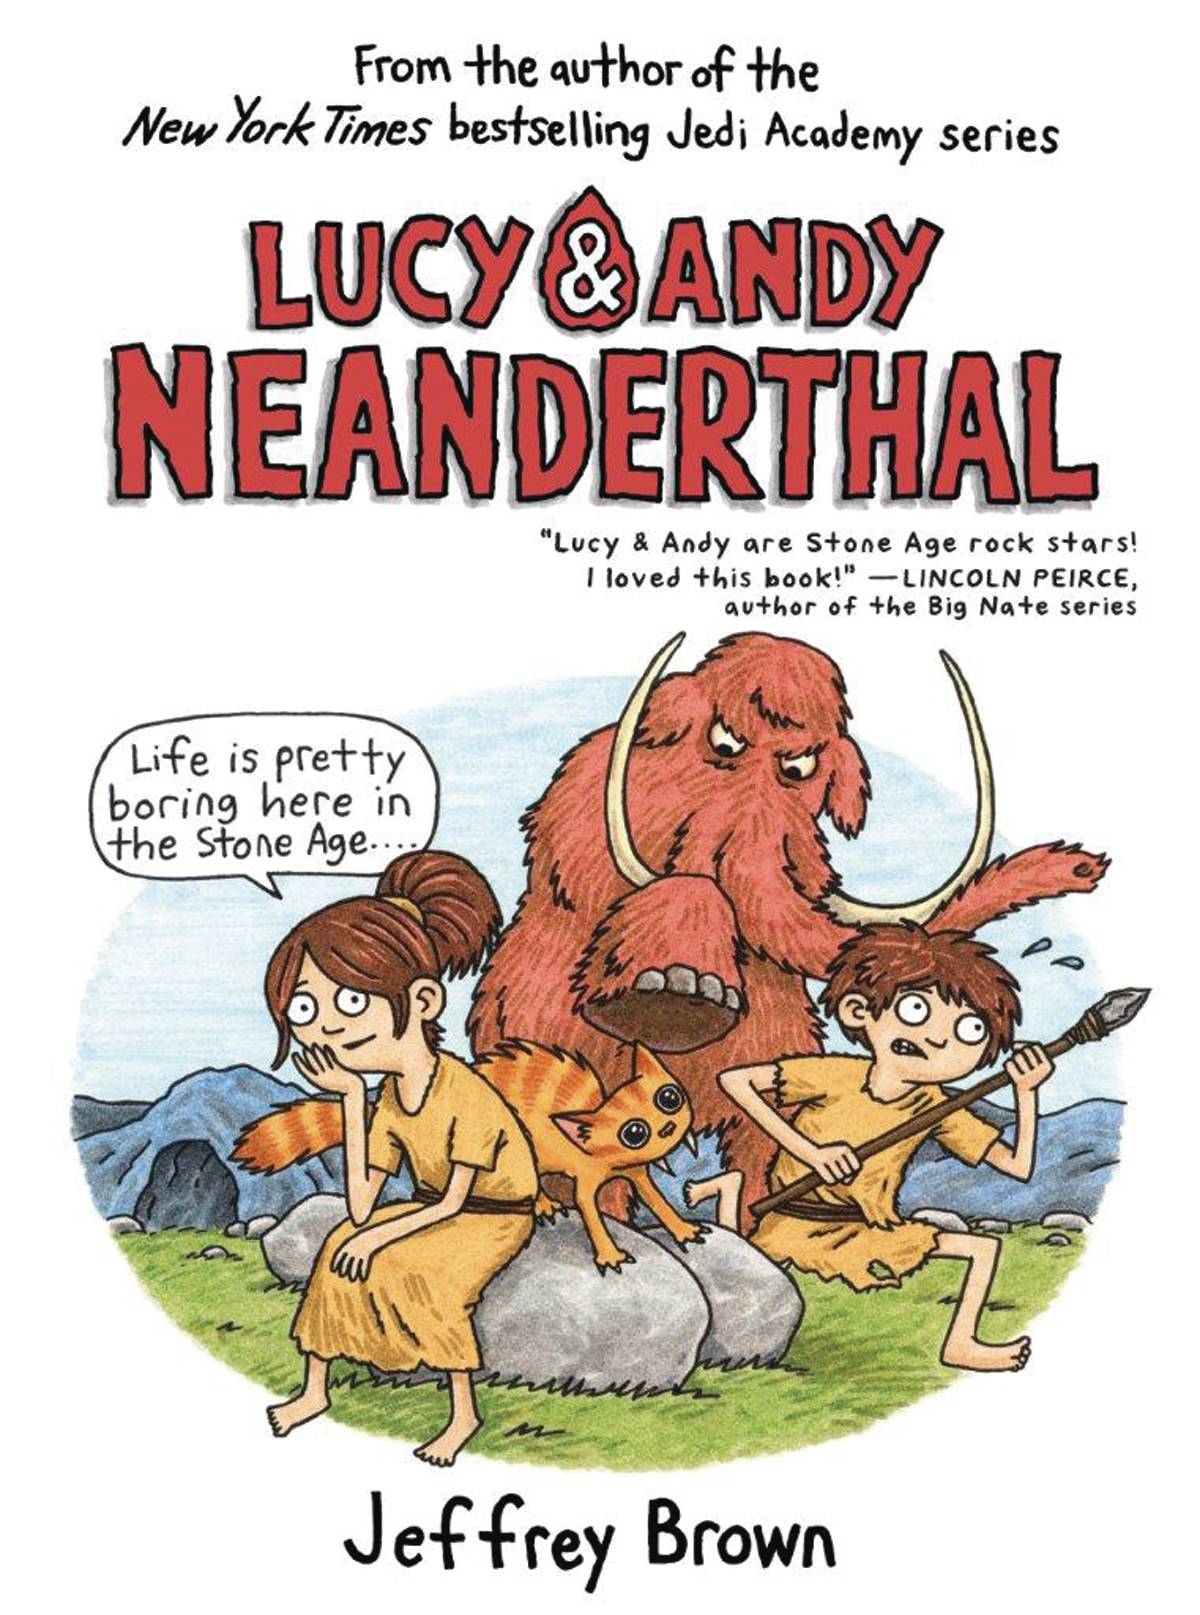 Lucy & Andy Neanderthal Hardcover Graphic Novel Volume 1